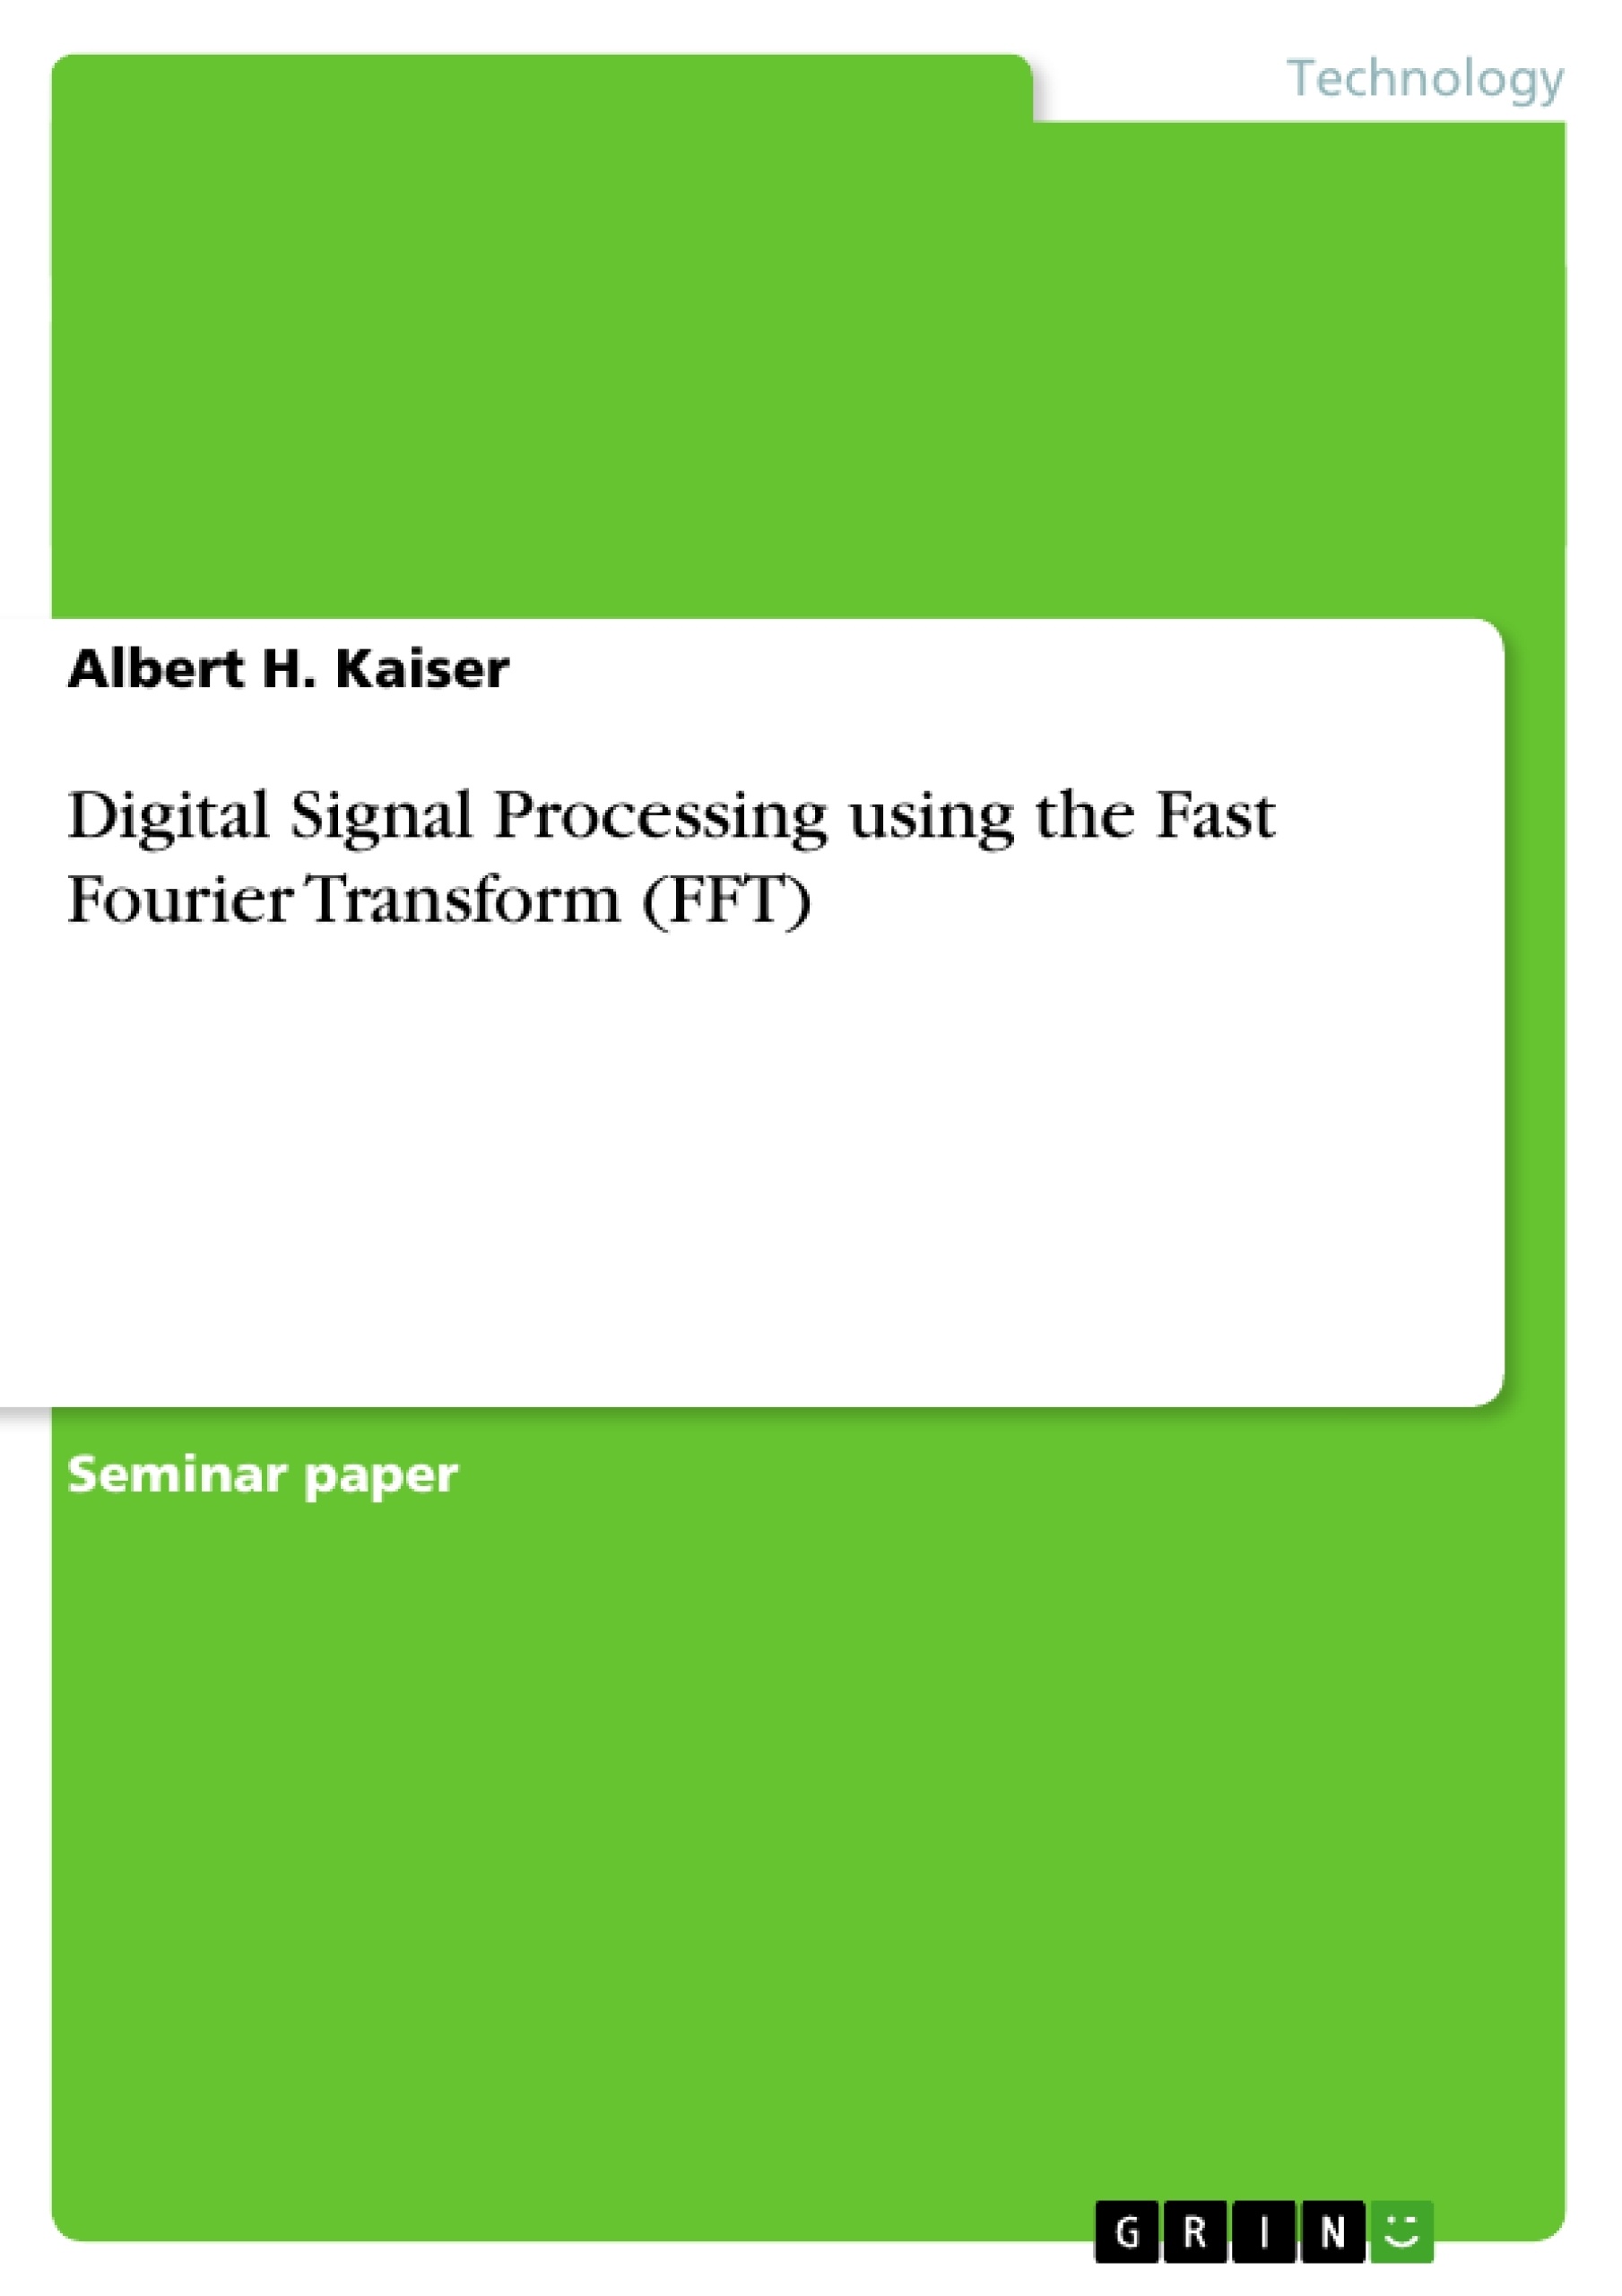 Title: Digital Signal Processing using the Fast Fourier Transform (FFT)